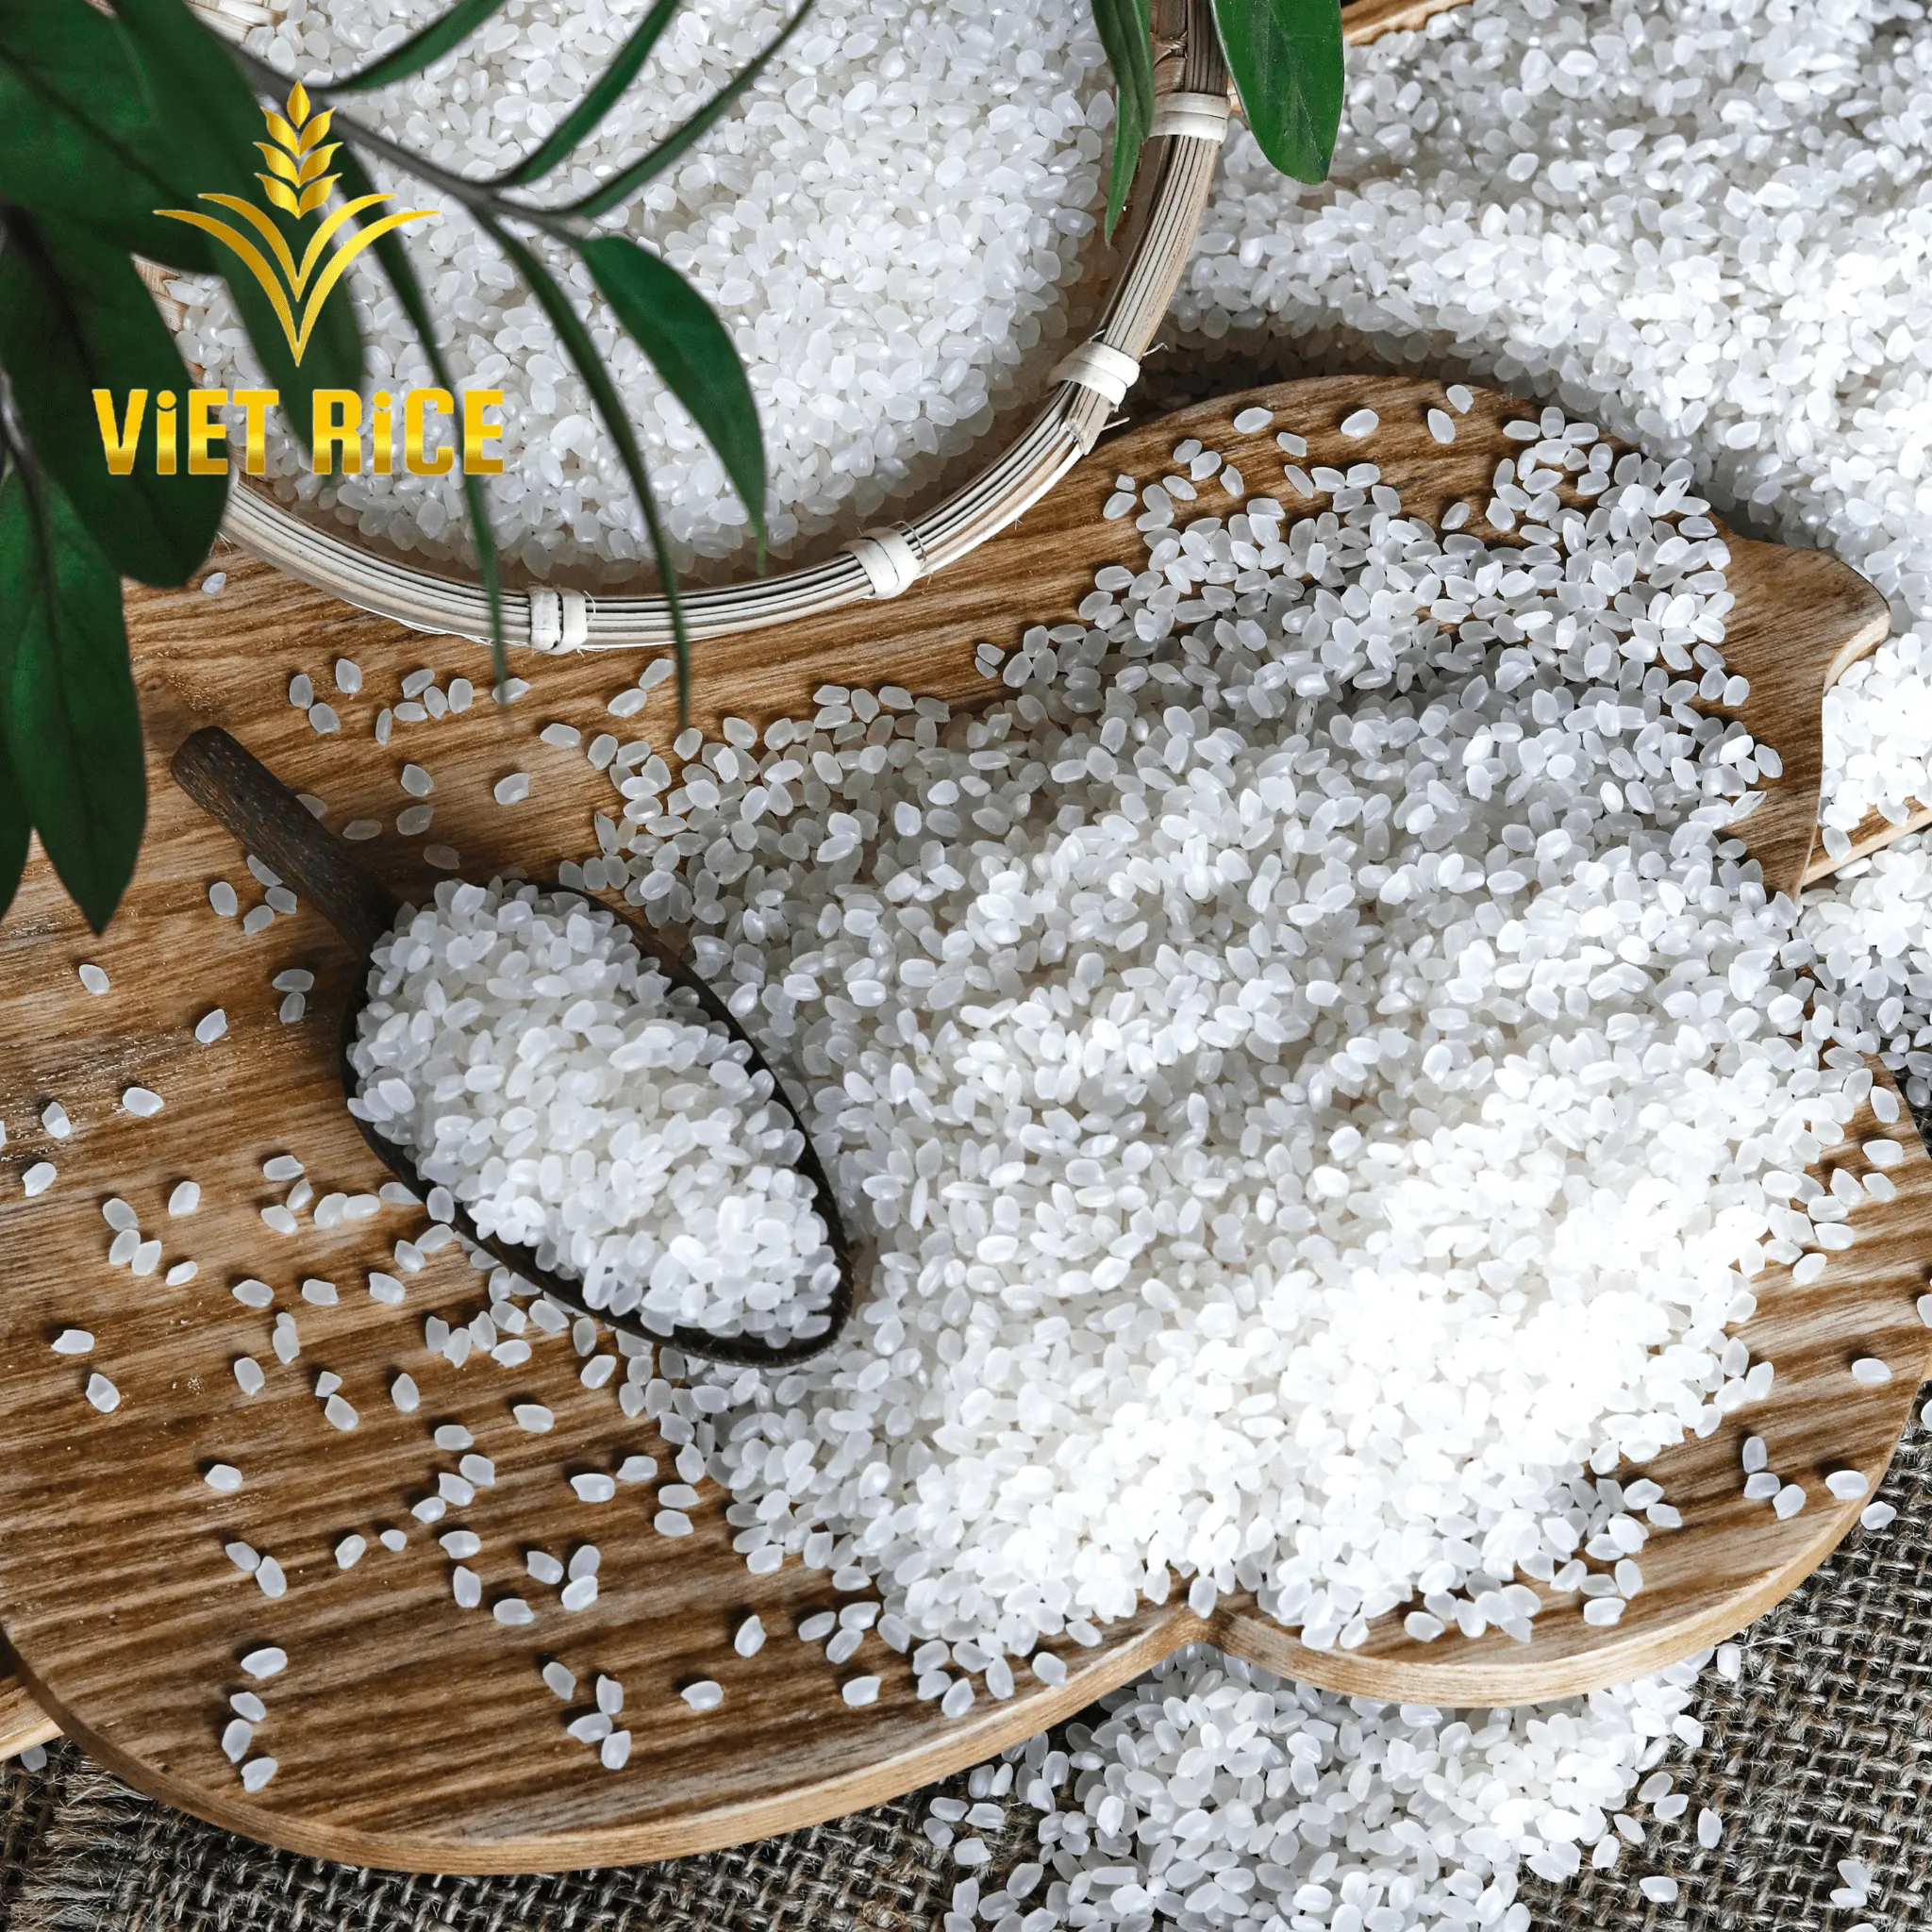 Japonica White 5% Broken Rice High Quality Internation Standard With Cerfiticate ISO : 9001 And Advance Manufacturing System